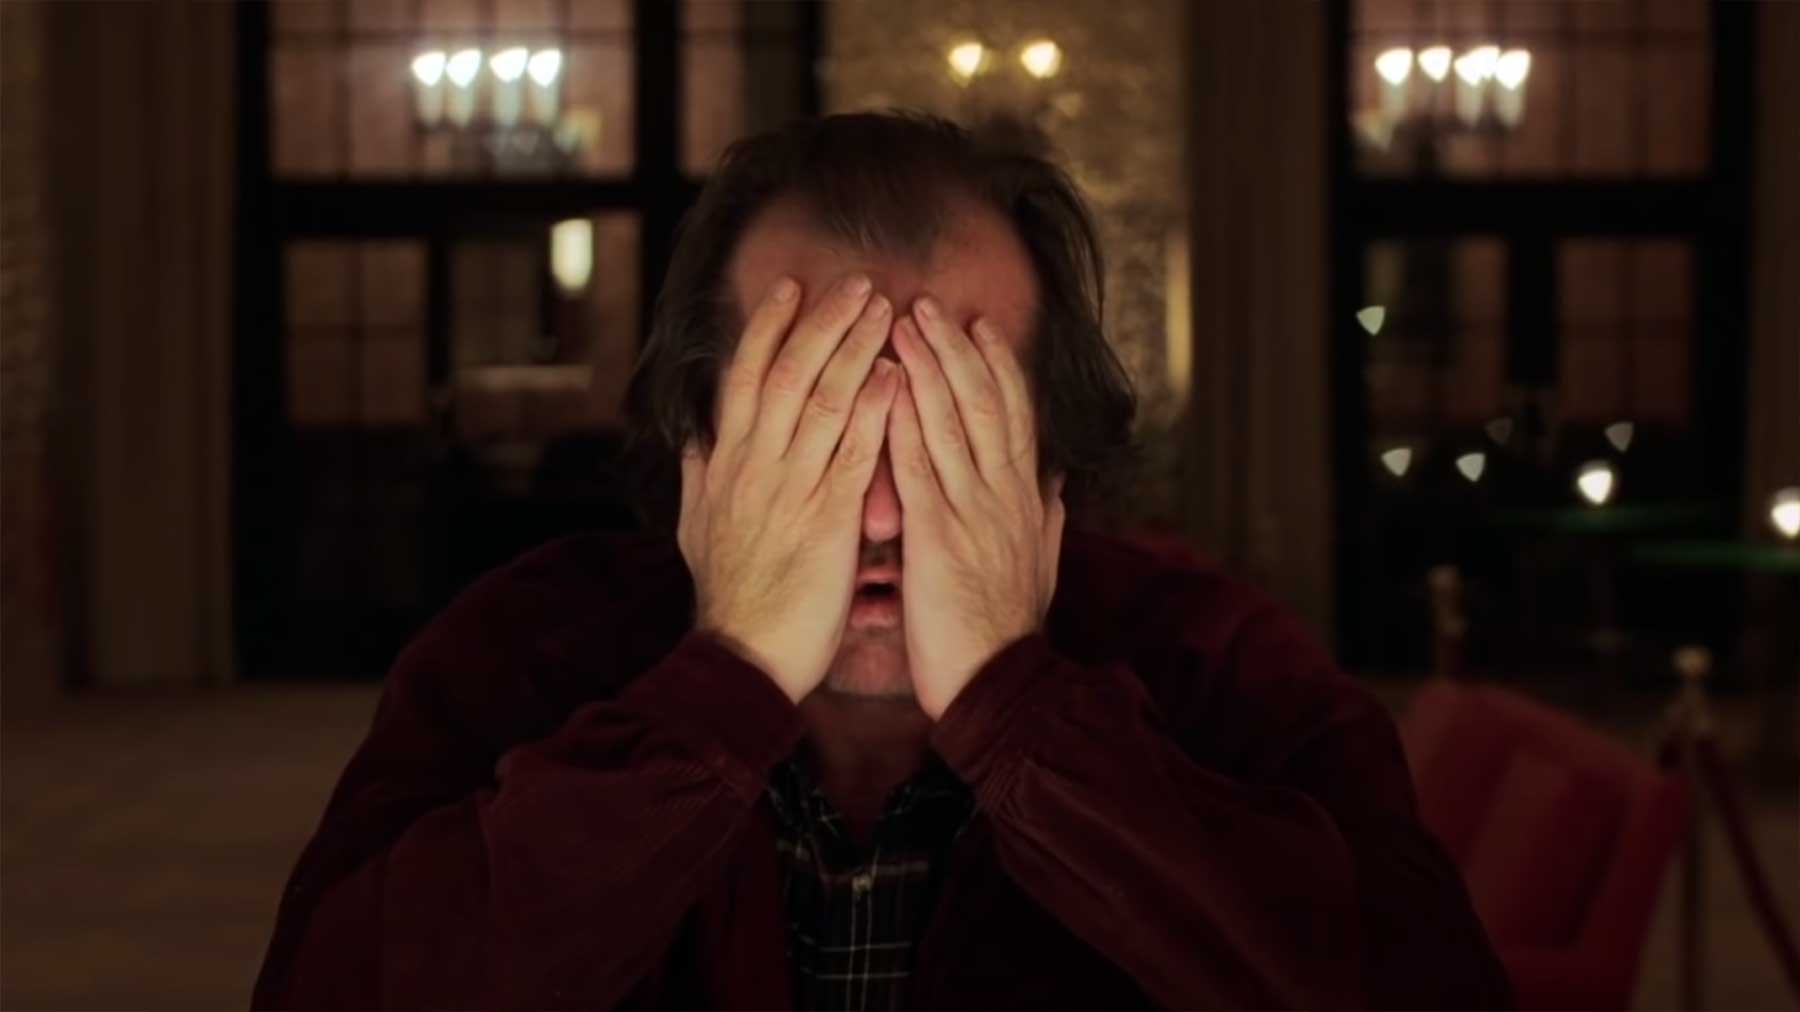 Der unsichtbare Horror im Film "The Shining" The-Invisible-Horror-of-The-Shining 